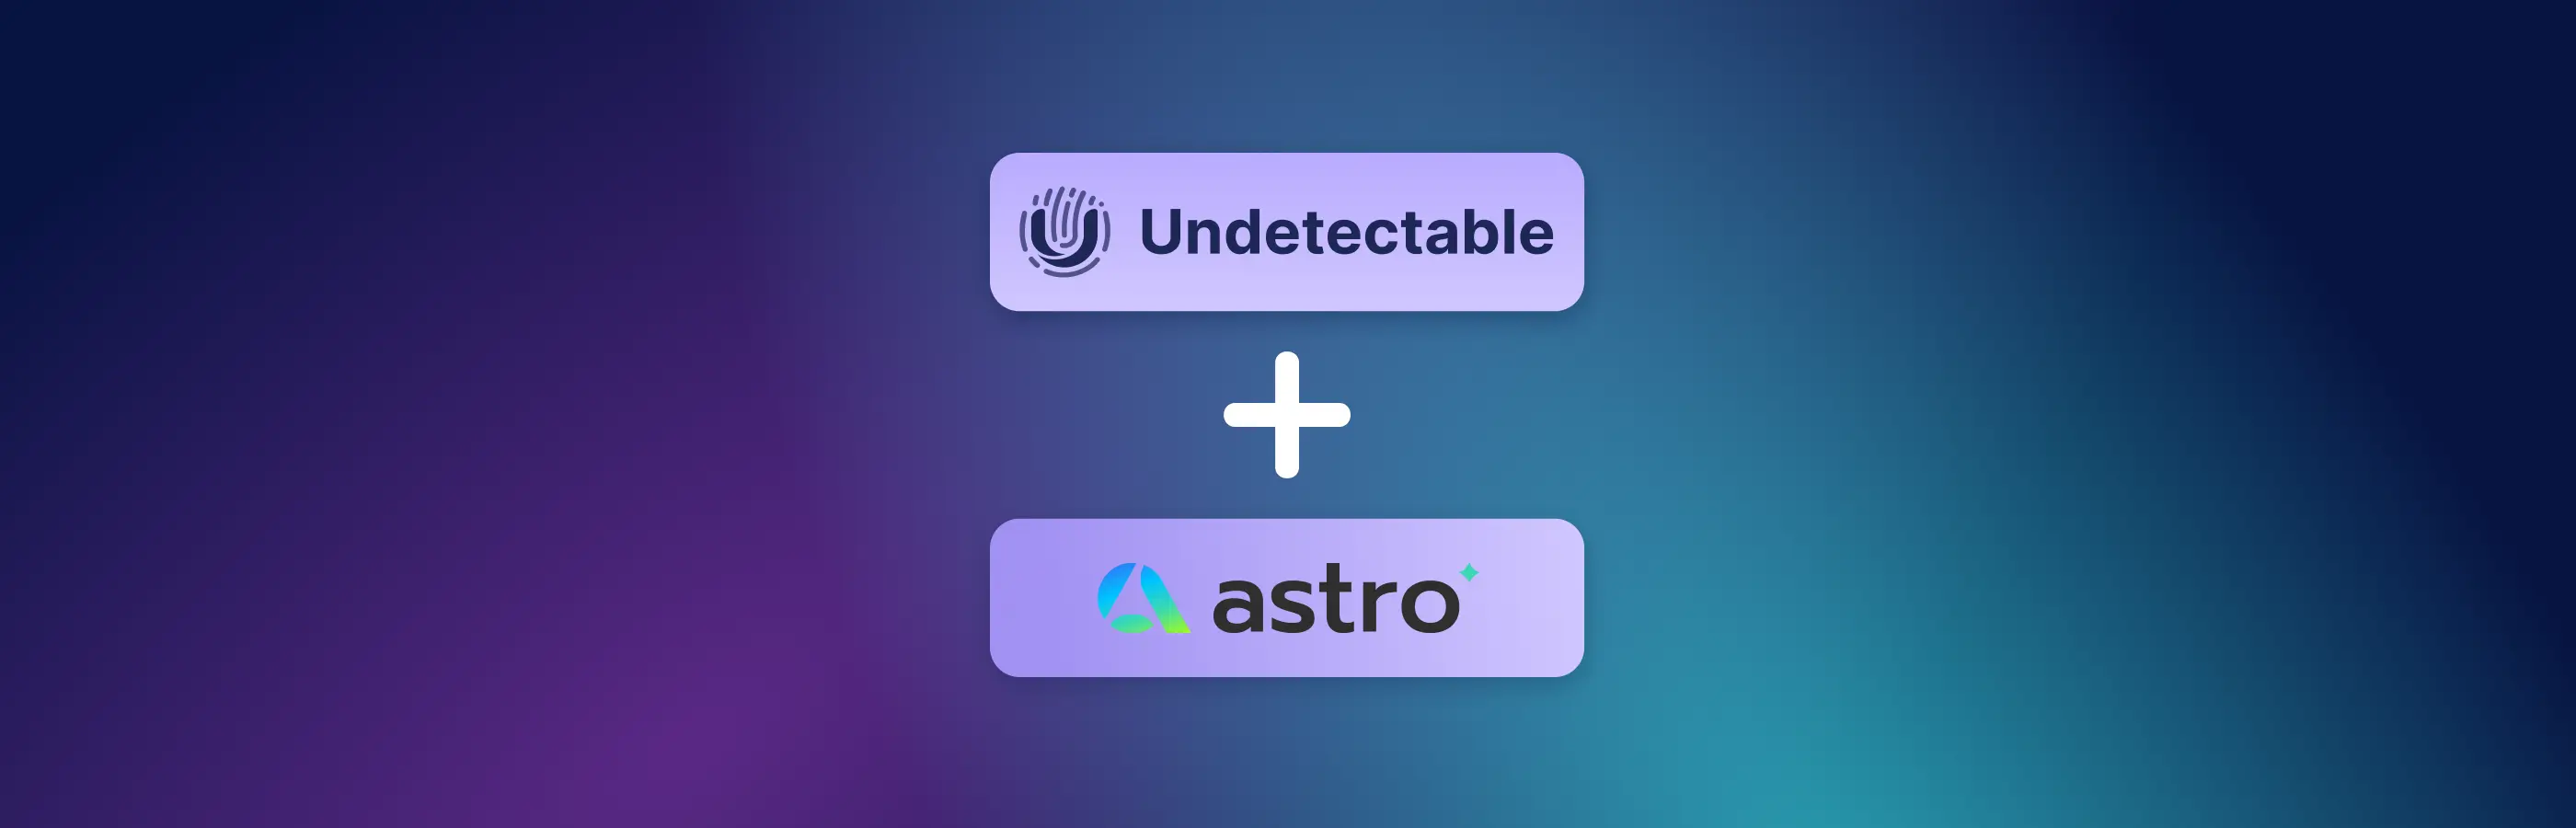 How to use Astro with Undetectable